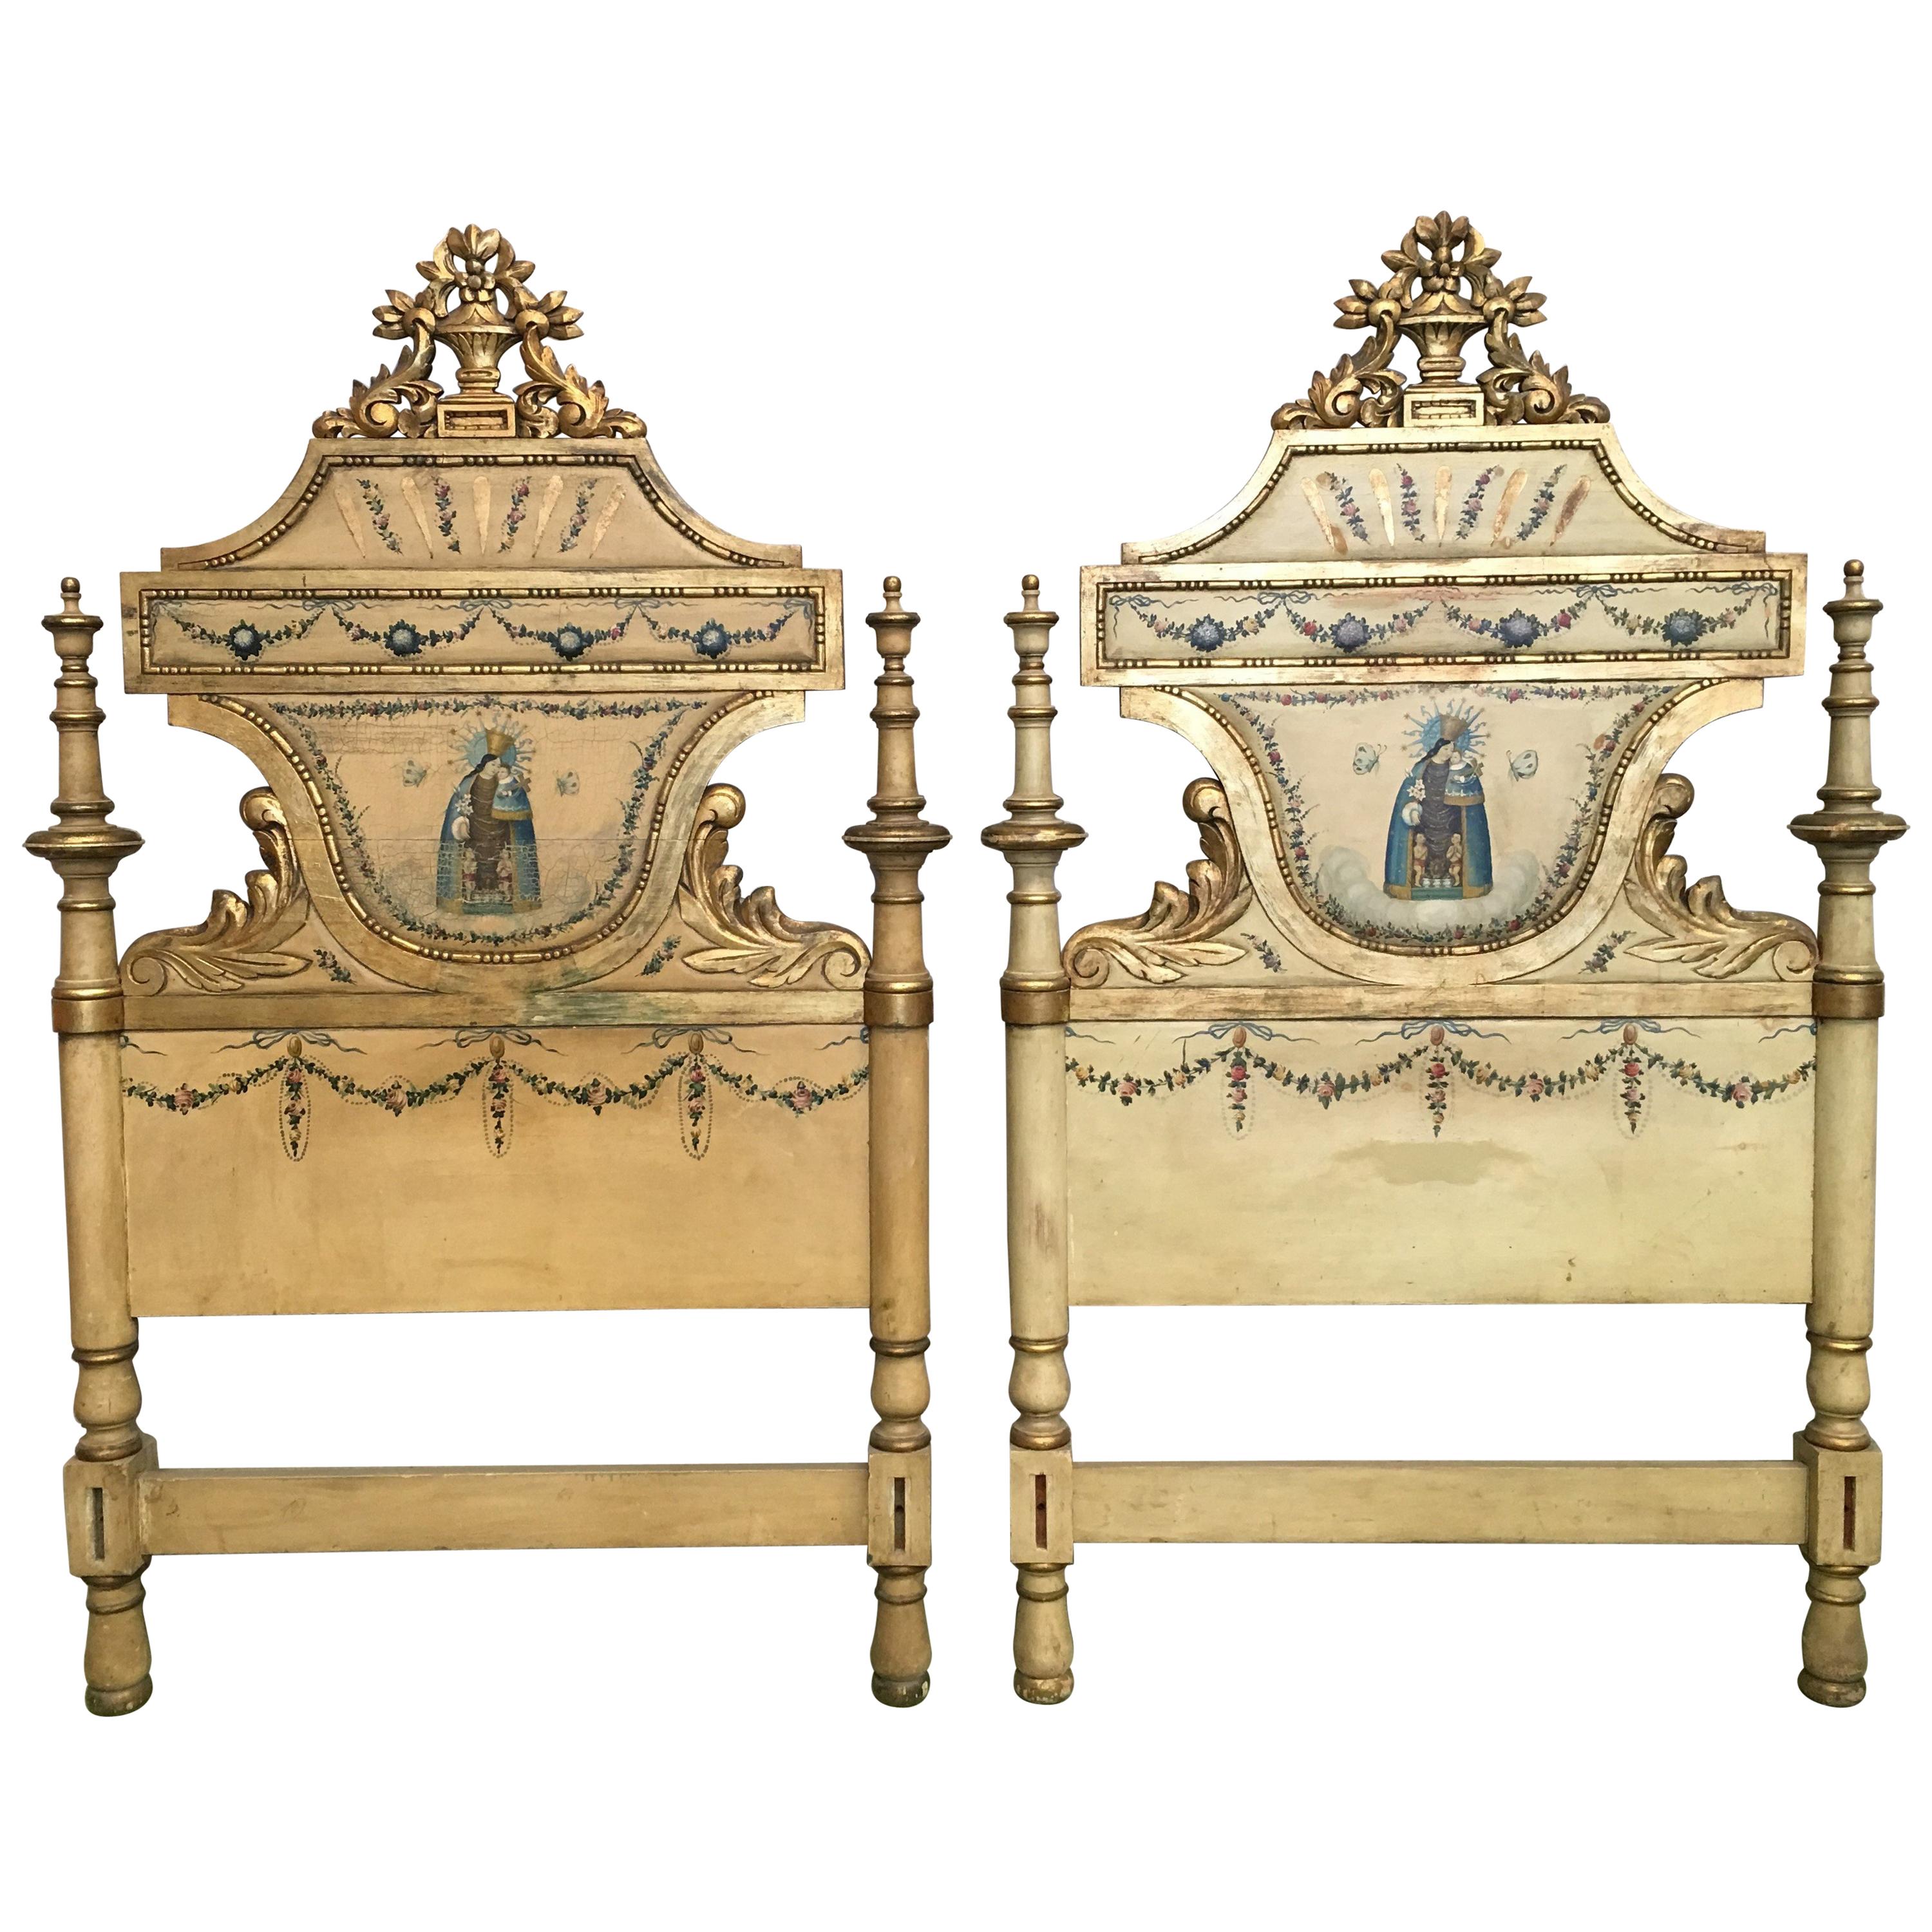 Early 19th Century Pair of Venetian Polychromed Headboards Featured Madonna